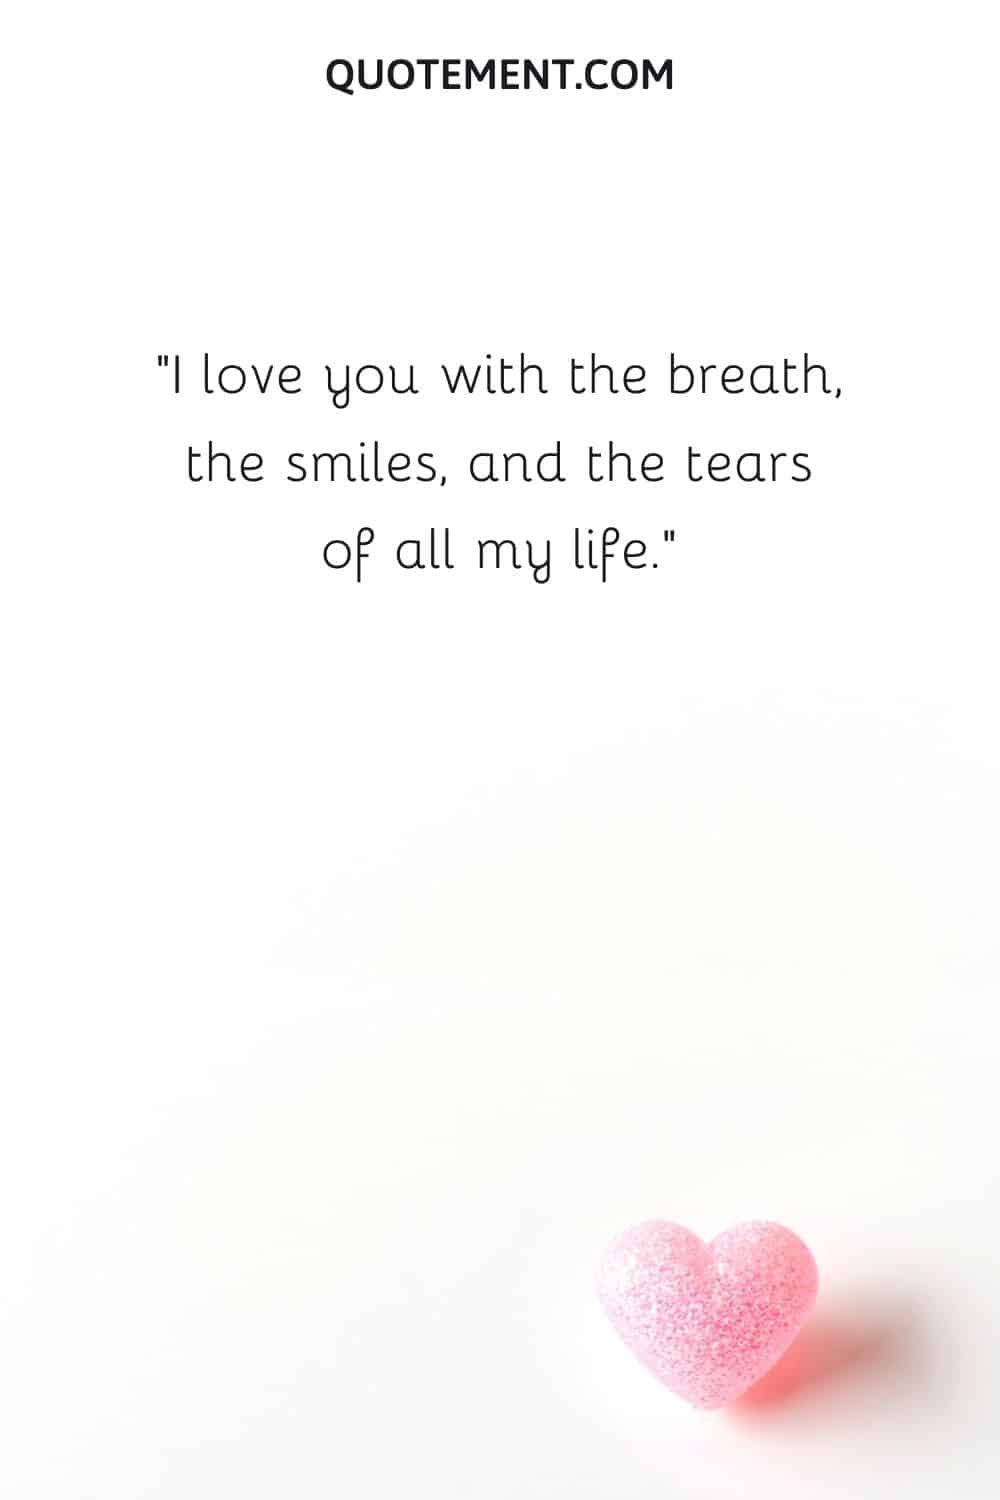 I love you with the breath, the smiles, and the tears of all my life.